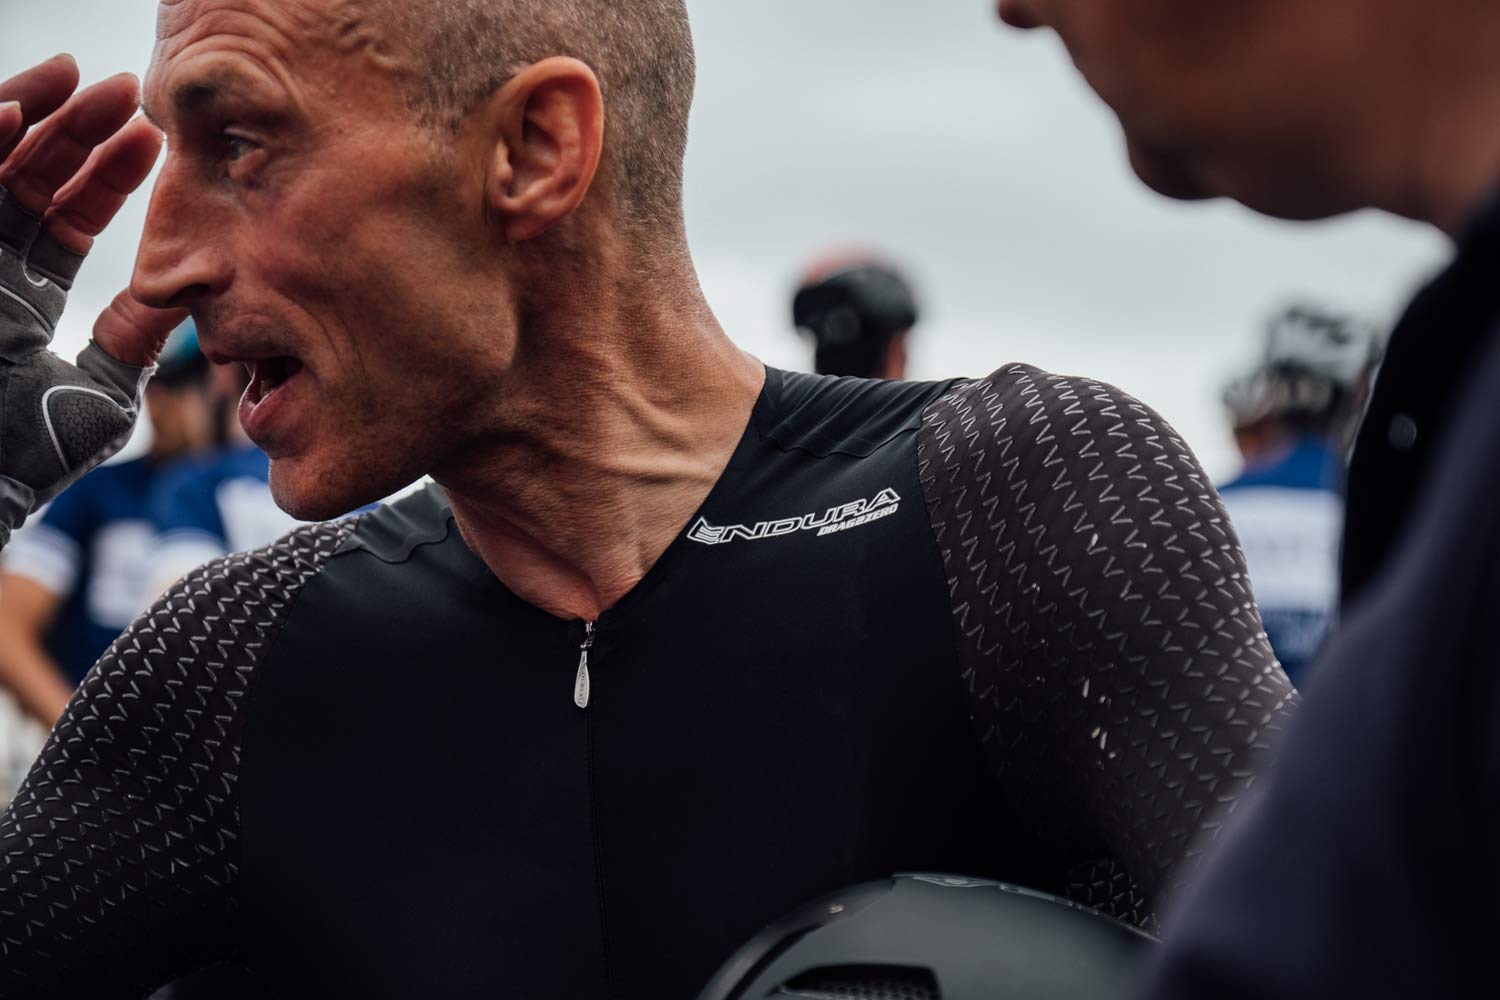 Endura D2Z SST silicone chevrons Banned by the UCI, with Graeme Obree